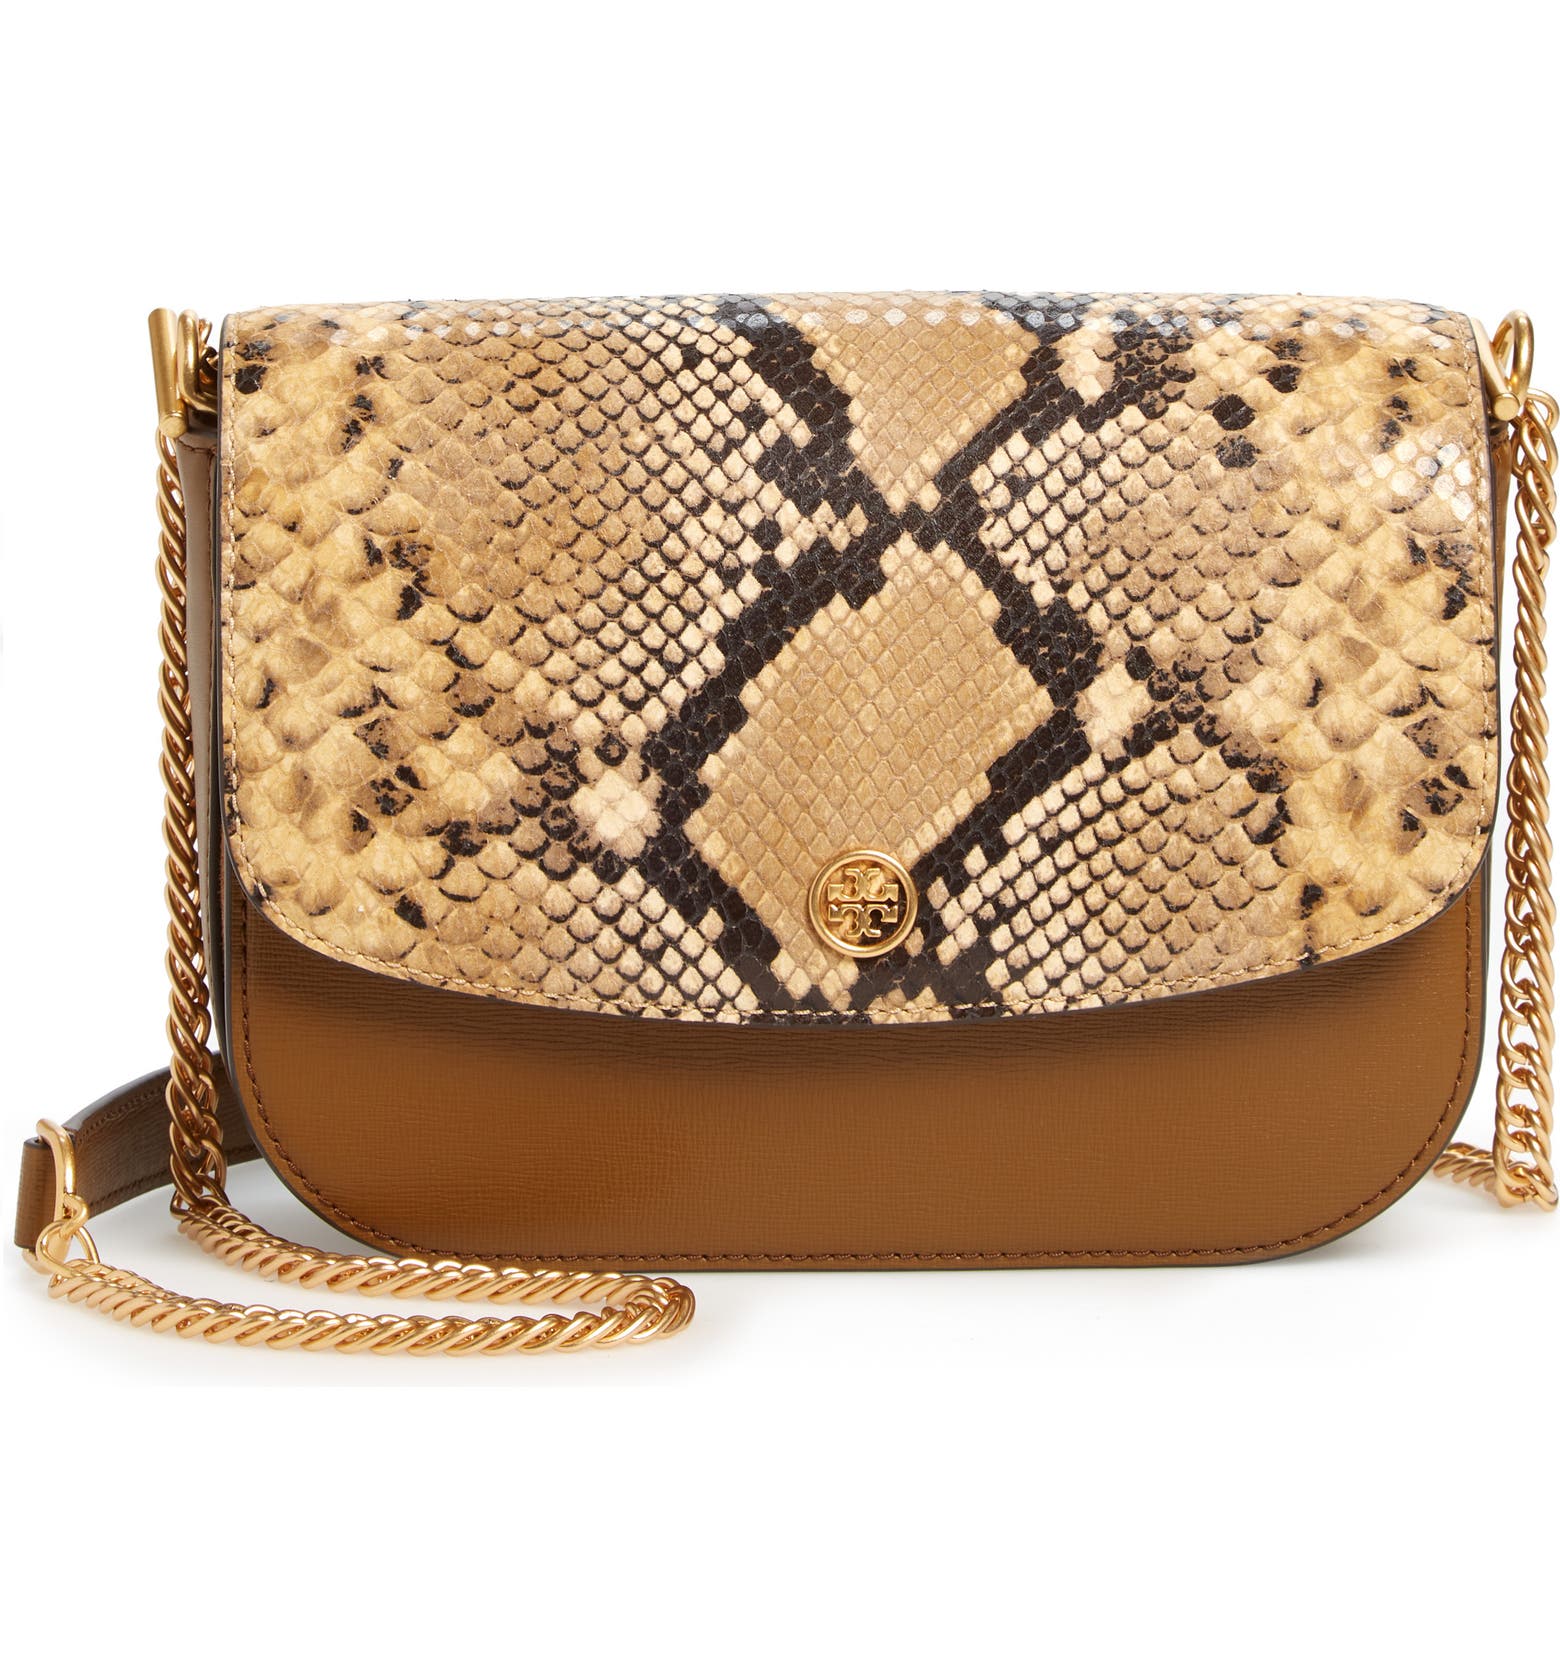 So many pretty handbags for spring are on sale at Nordstrom right now